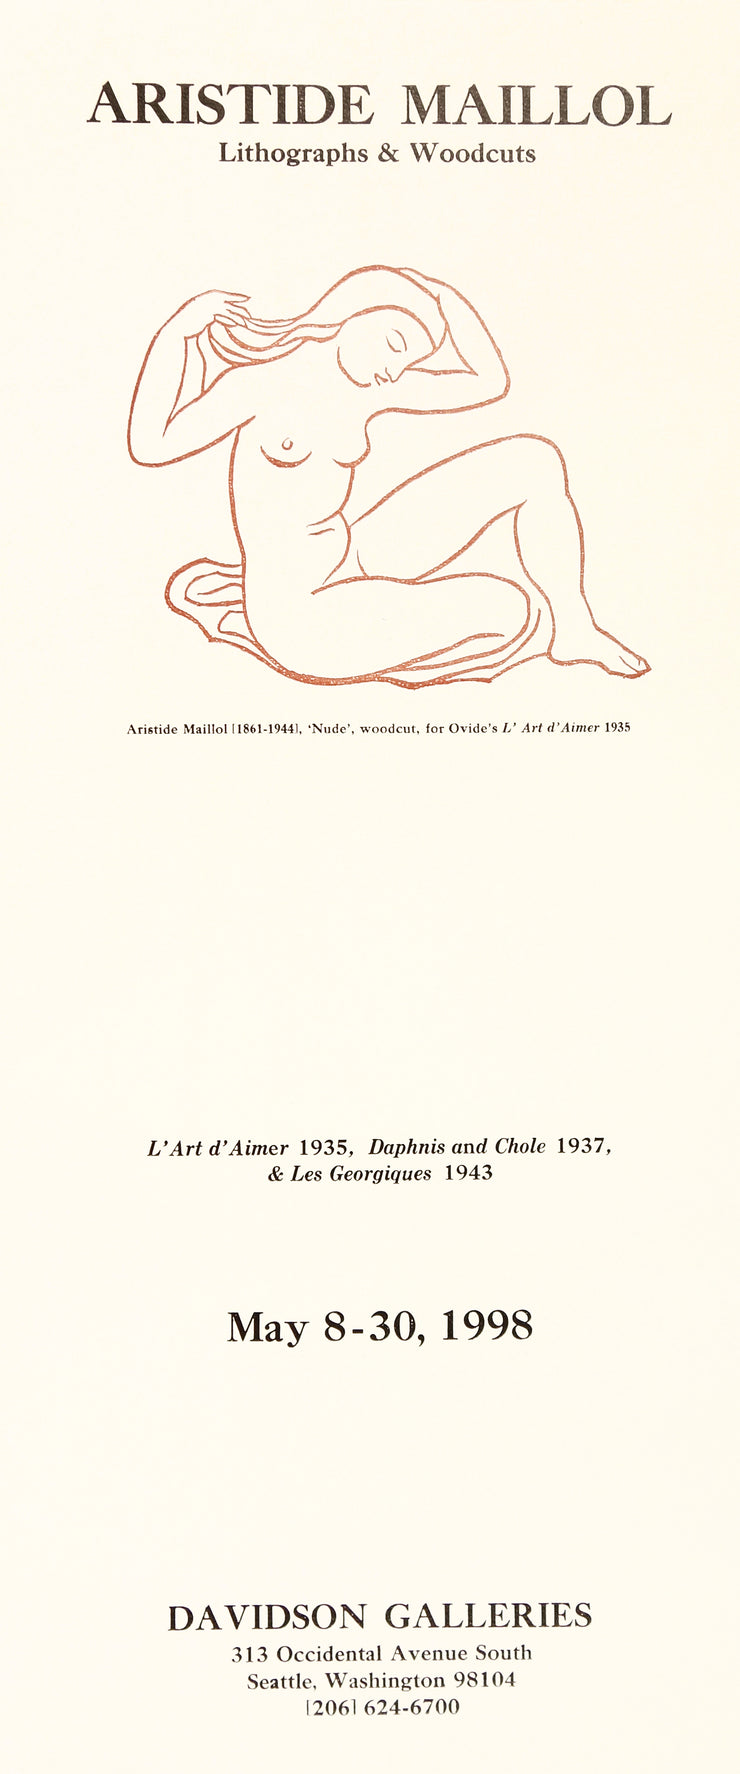 Aristide Maillol: Lithographs and Woodcuts (Nude) by Aristide Maillol - Davidson Galleries